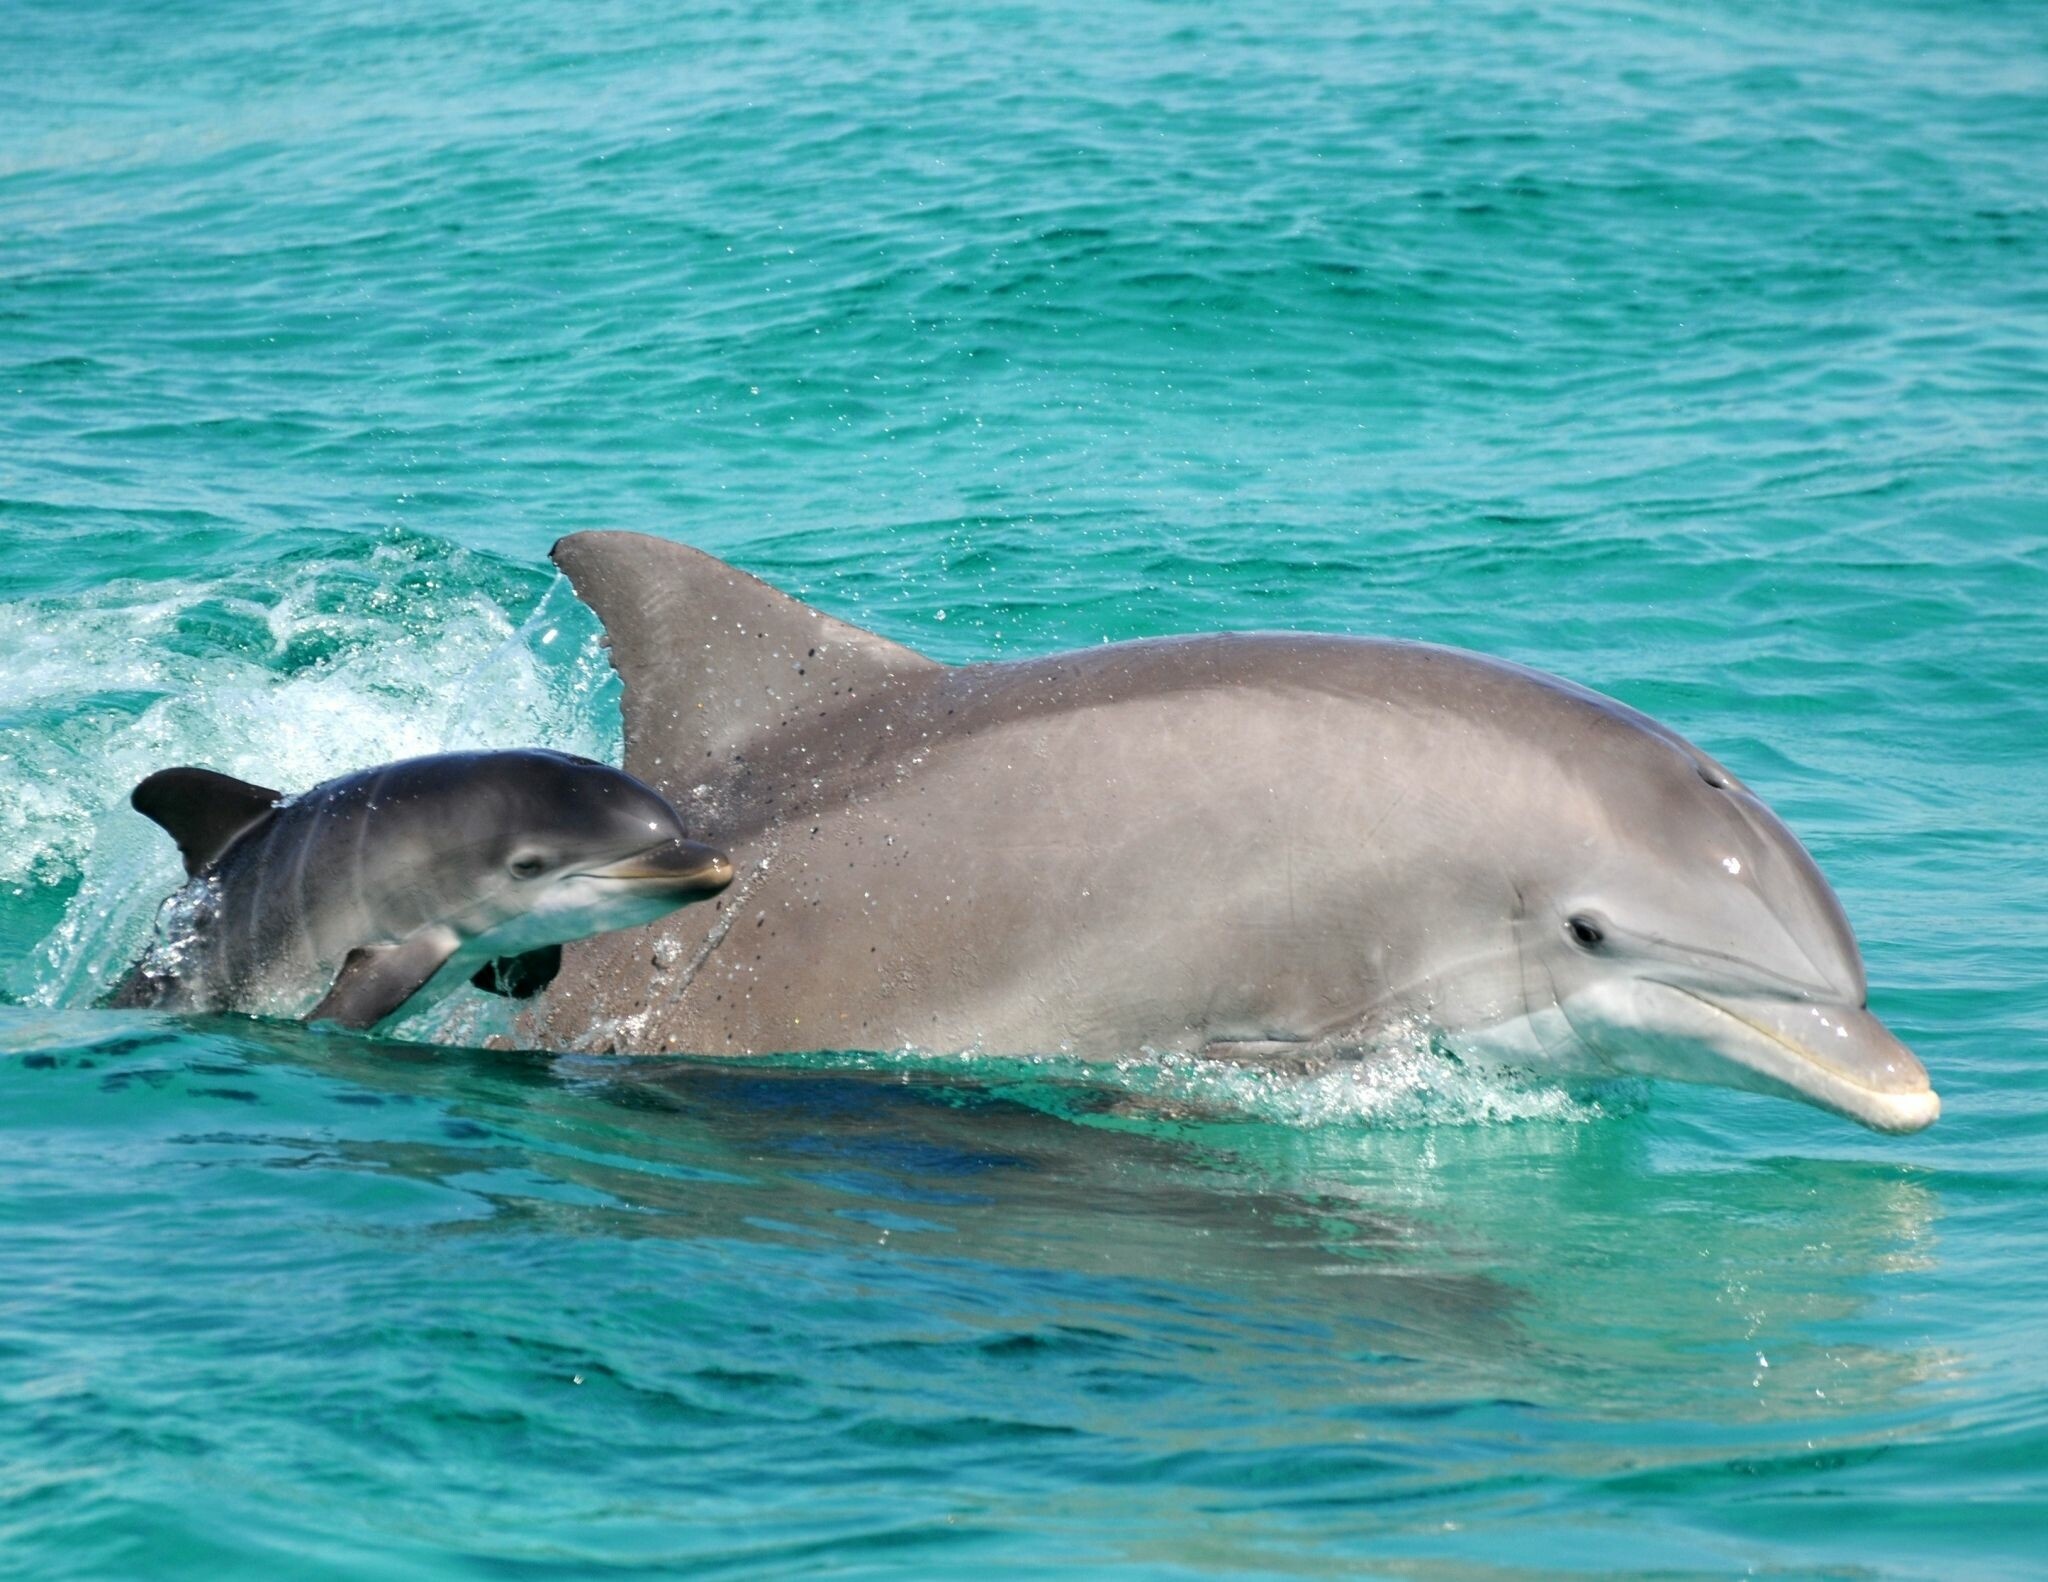 Baby dolphin wallpapers, HD and 4K images, Mobile backgrounds, Dolphin-themed wallpapers, 2050x1590 HD Desktop